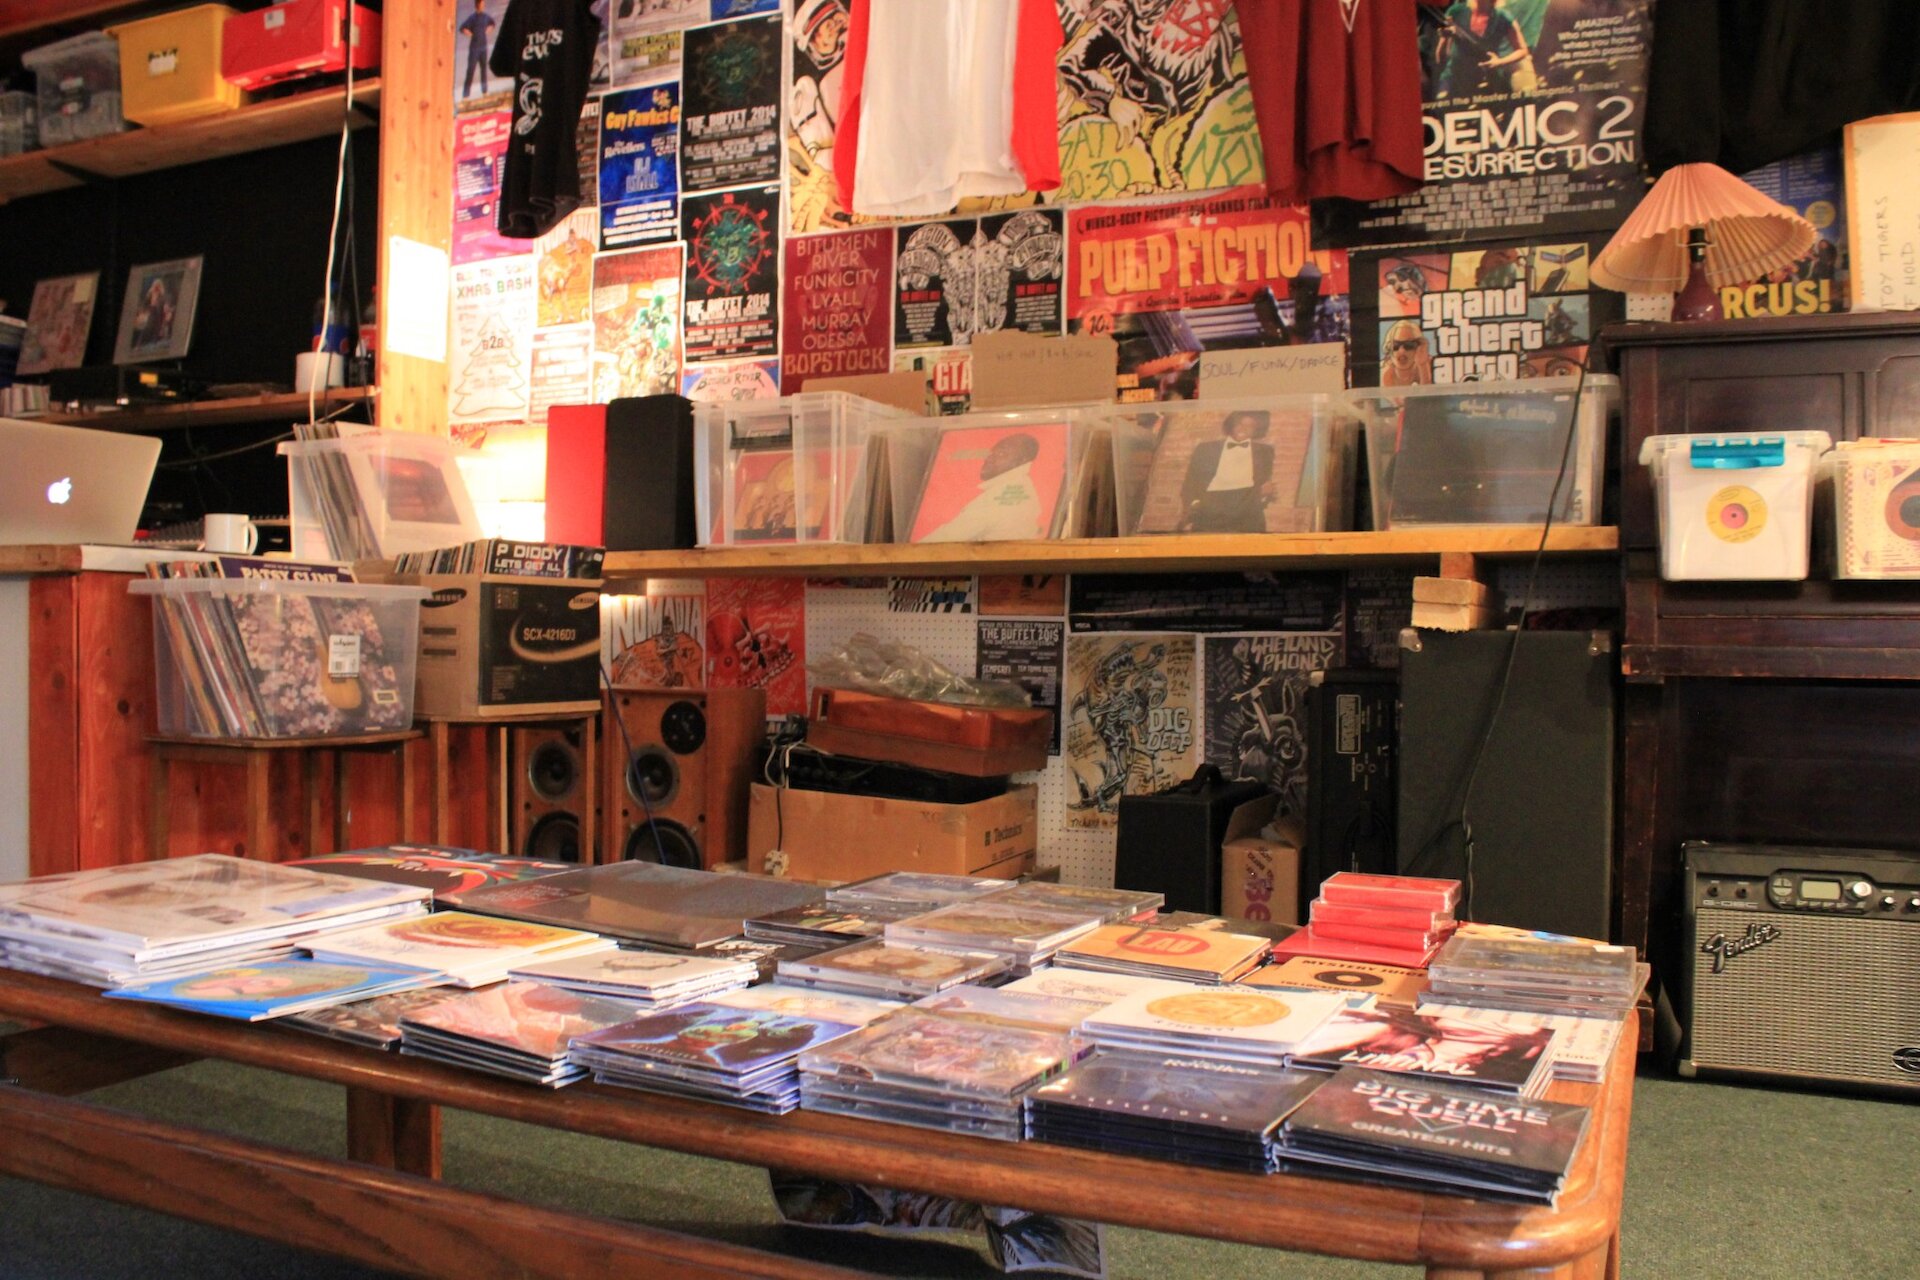 Some of the CDs, Vinyl and other music merchendise available at The Bop Shop - Image courtesy Alex Garrick Wright